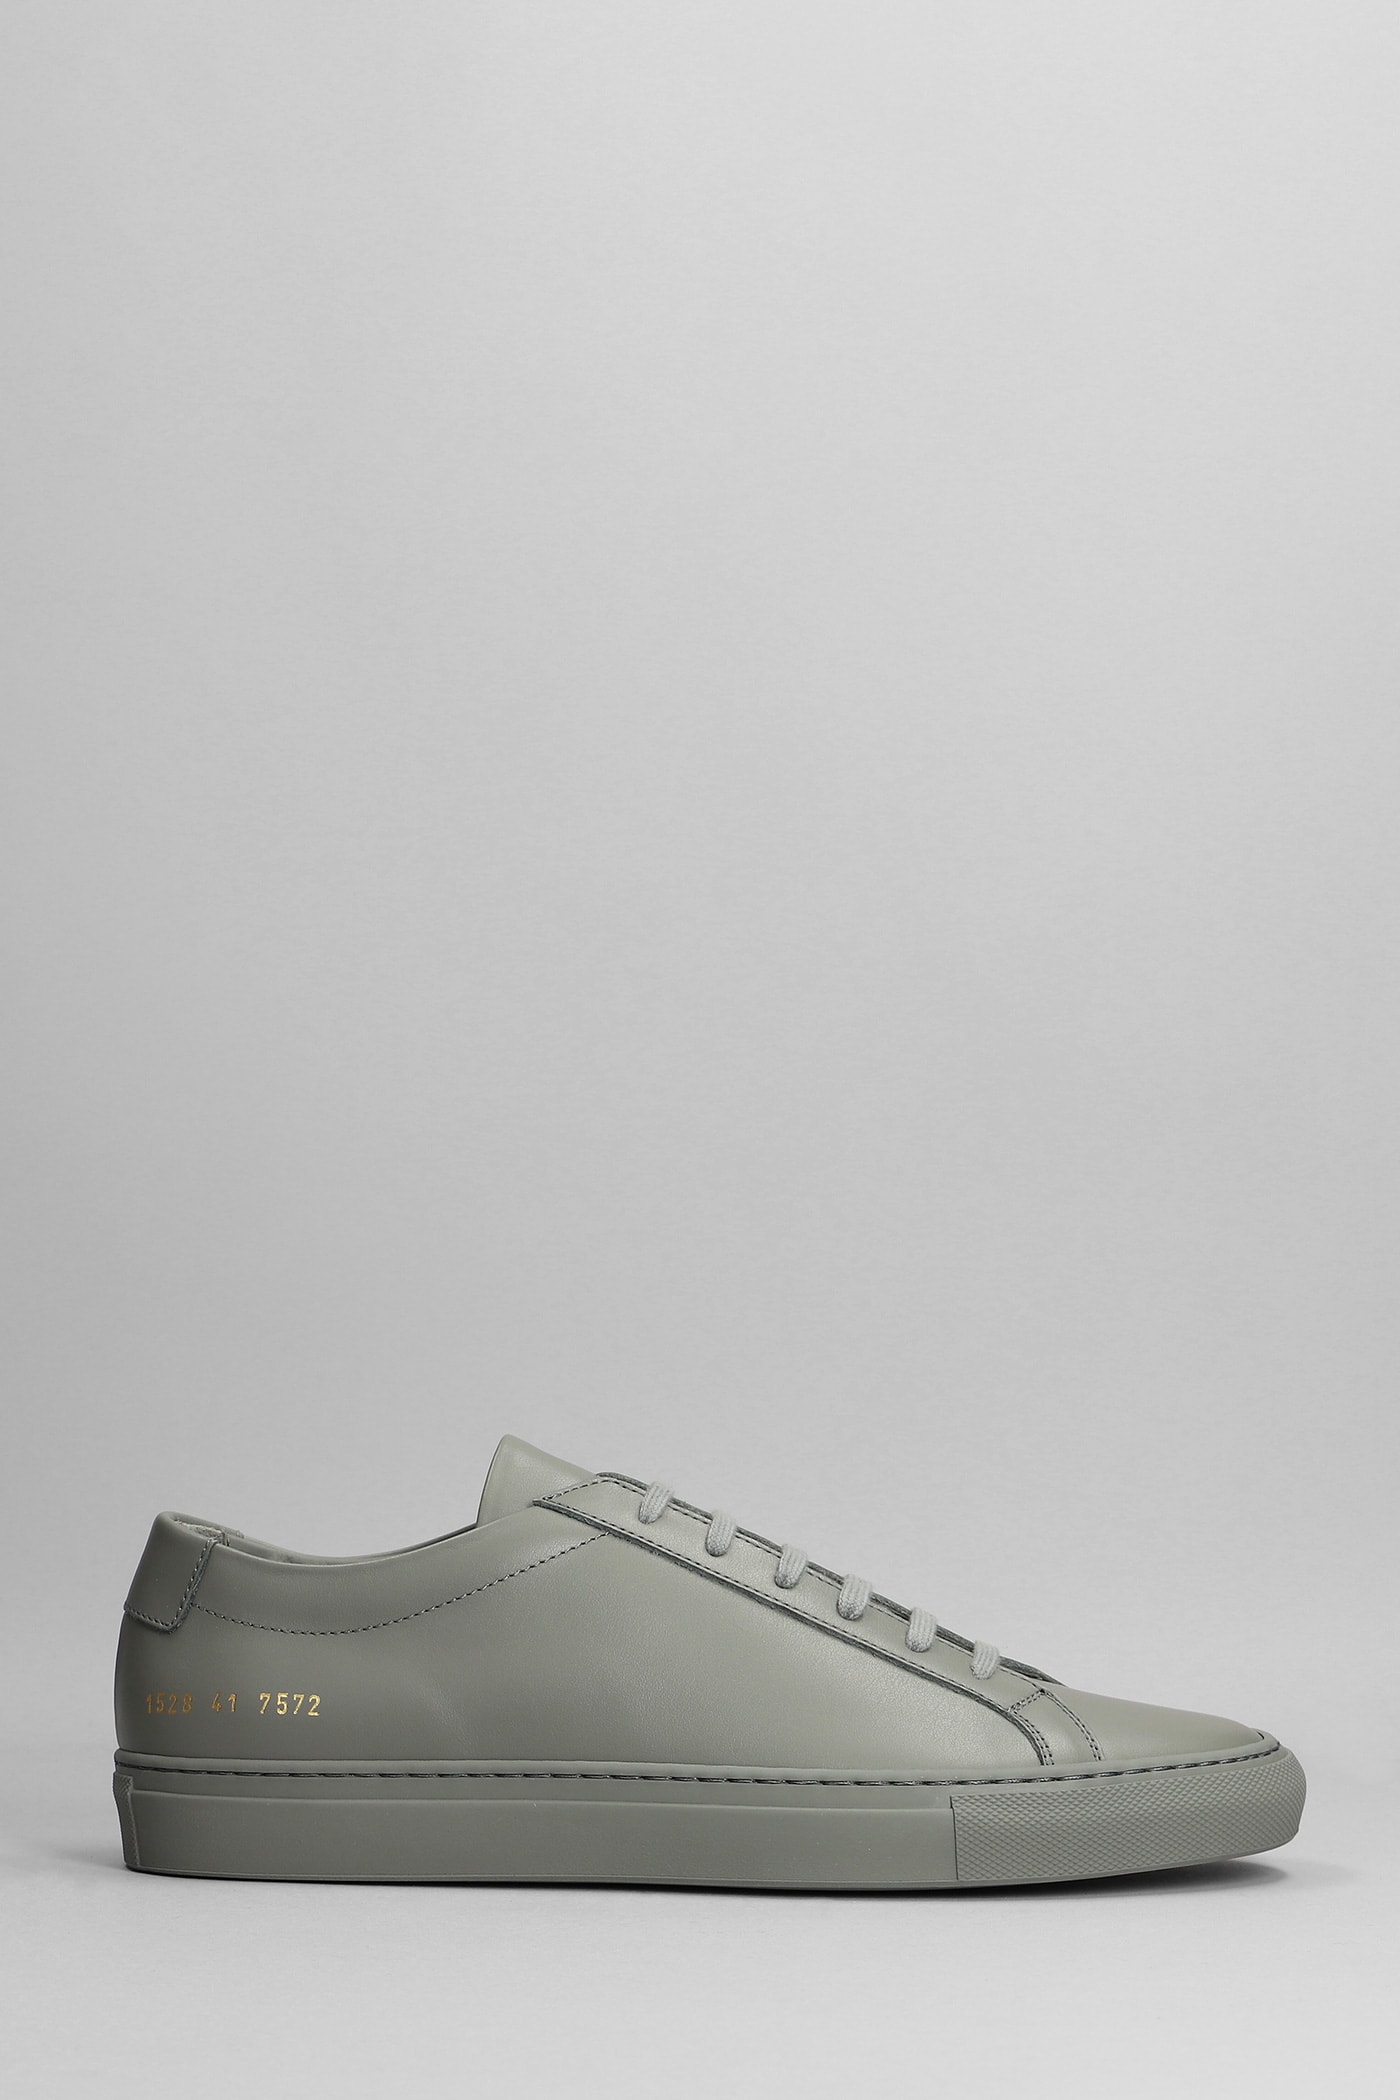 Common Projects Original Achilles Sneakers In Grey Leather